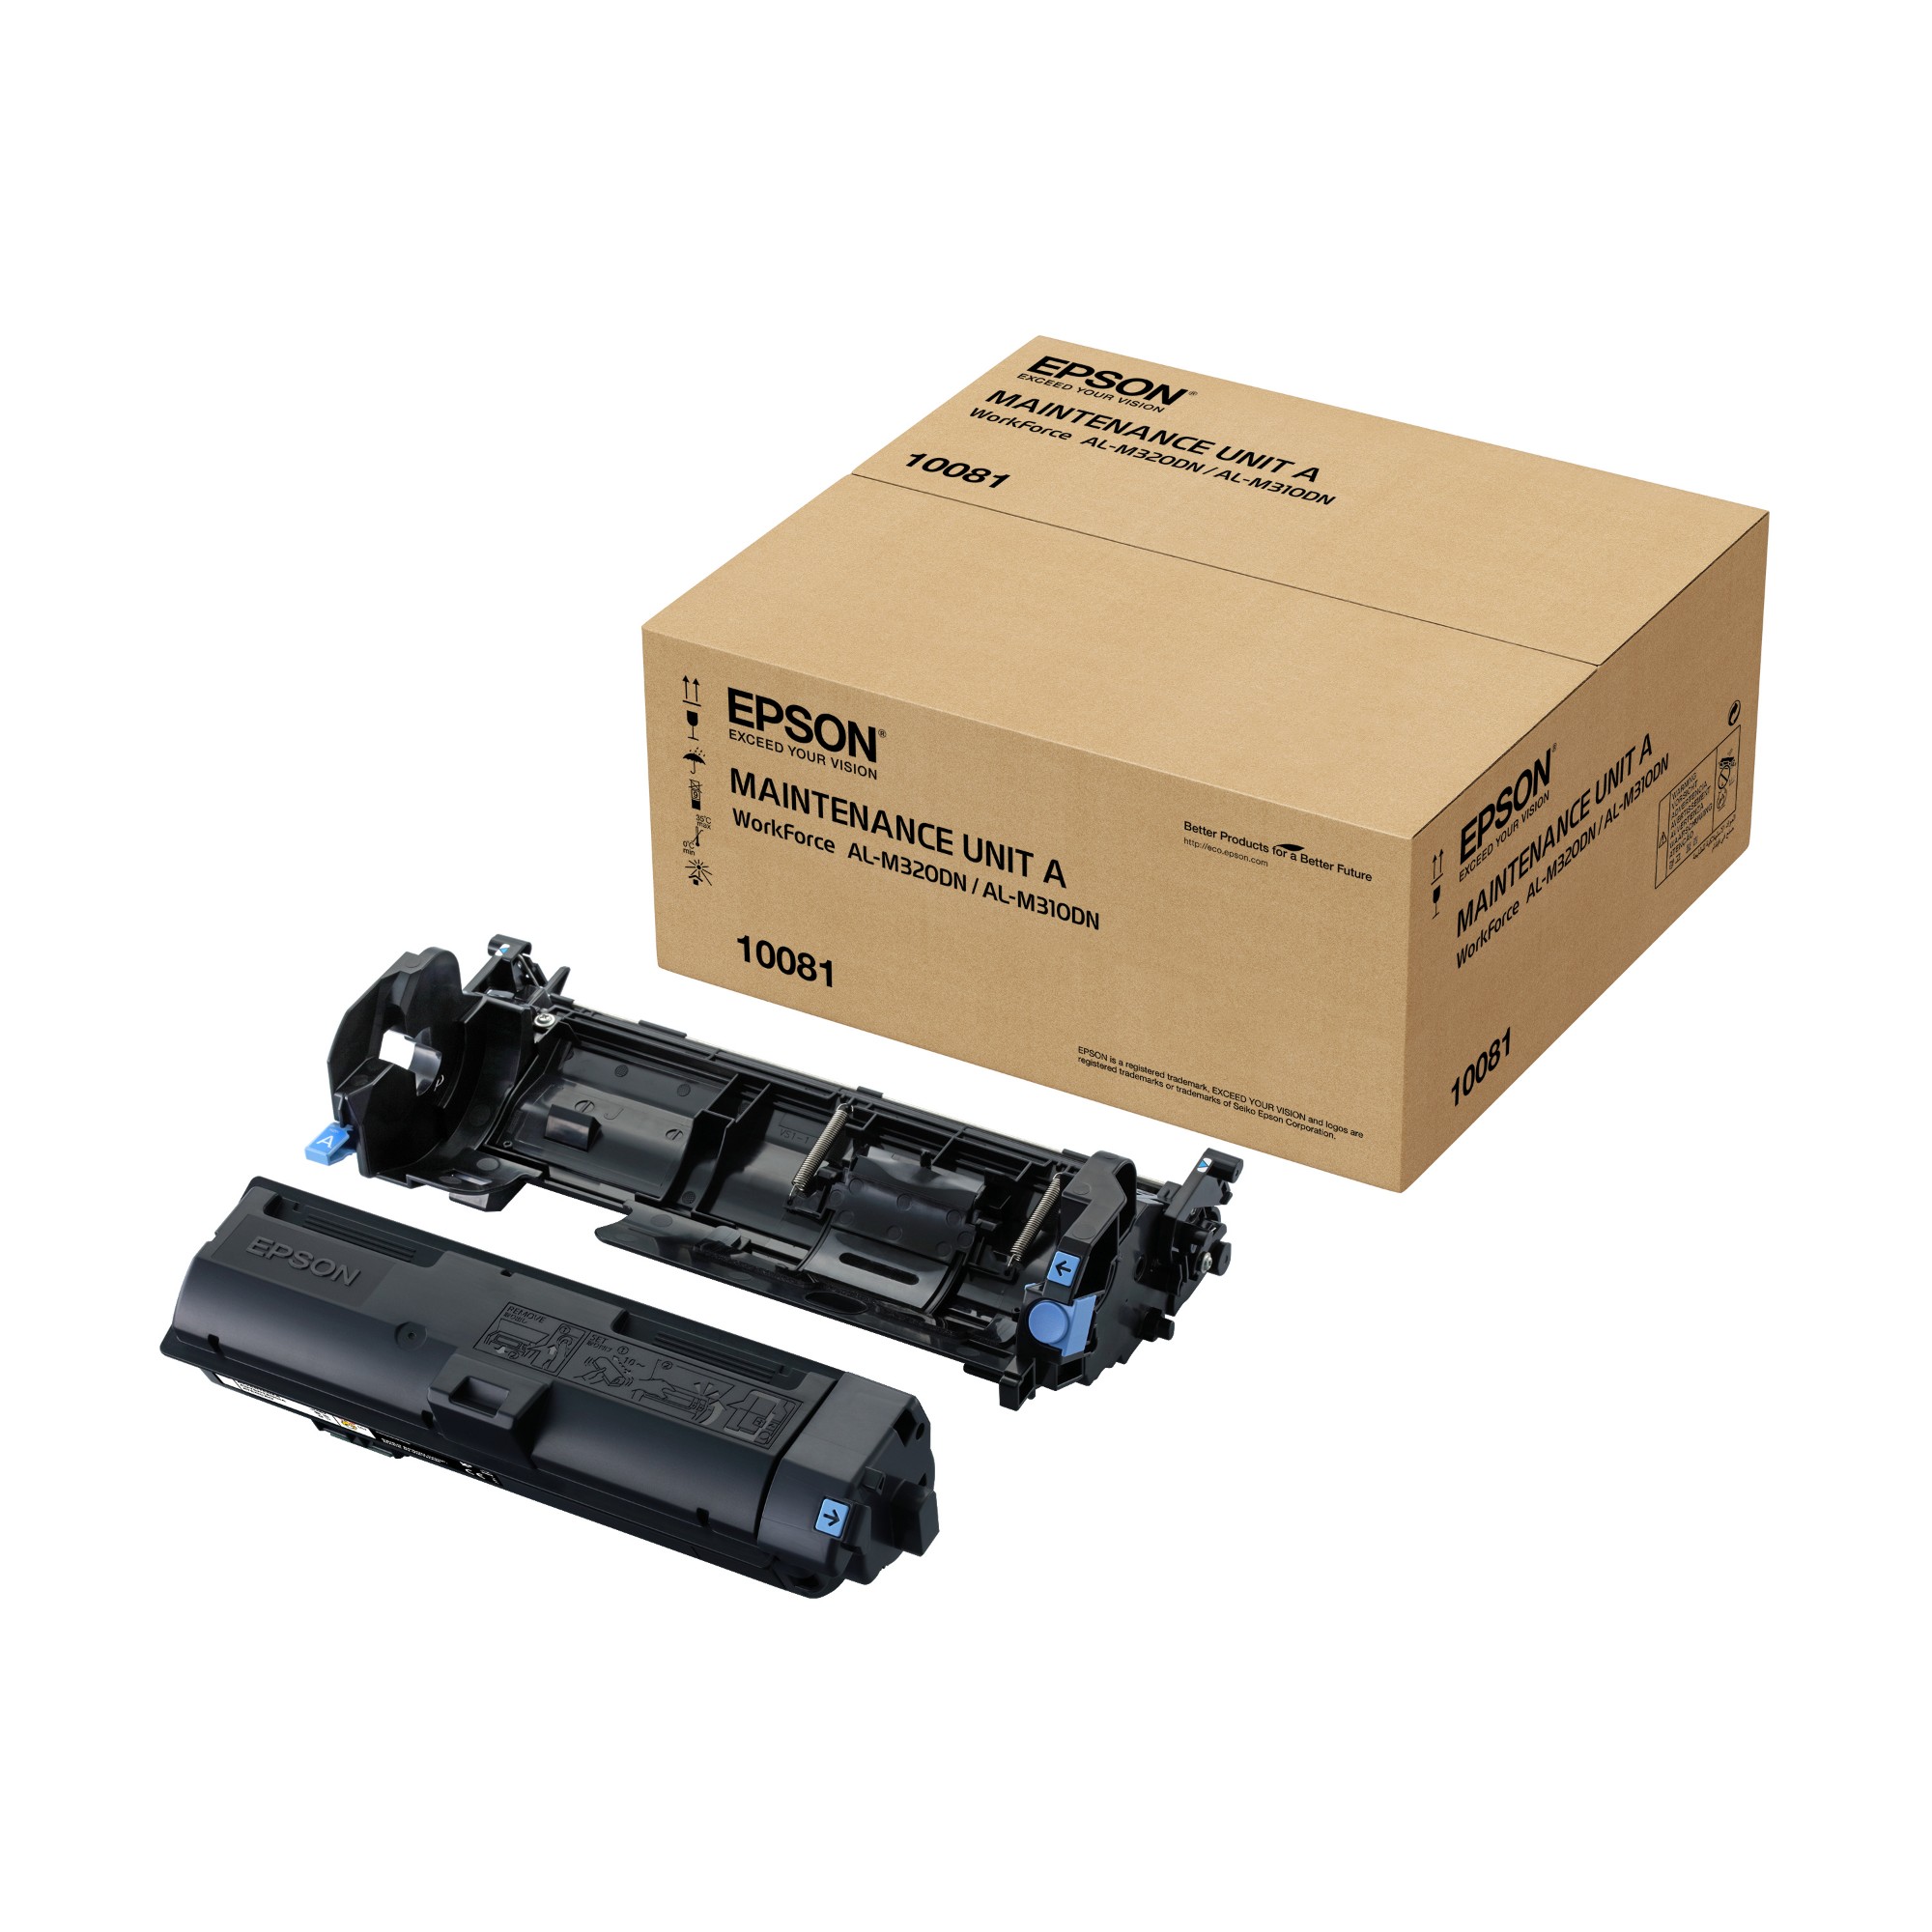 Photos - Ink & Toner Cartridge Epson C13S110081/S110081 Maintenance-kit A, 100K pages for  WorkF 